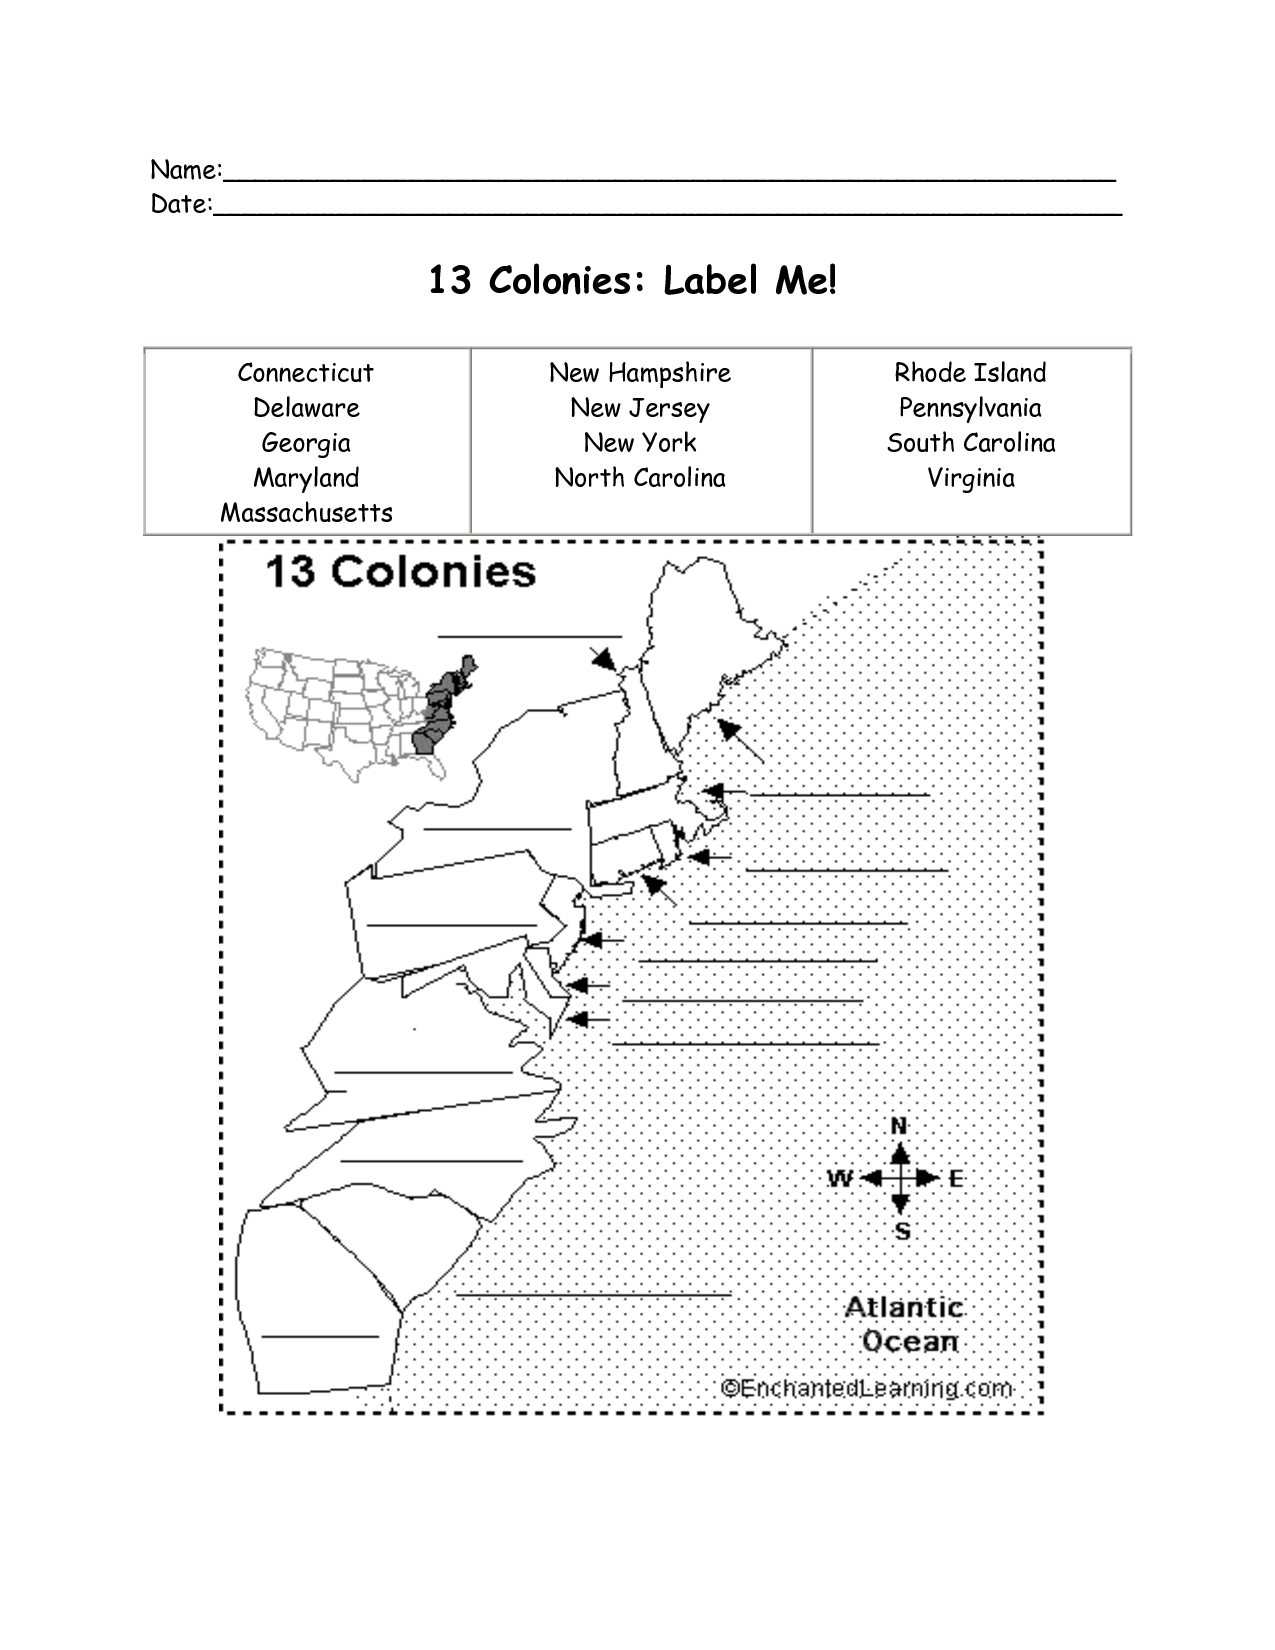 13-colonies-map-worksheet-promotiontablecovers